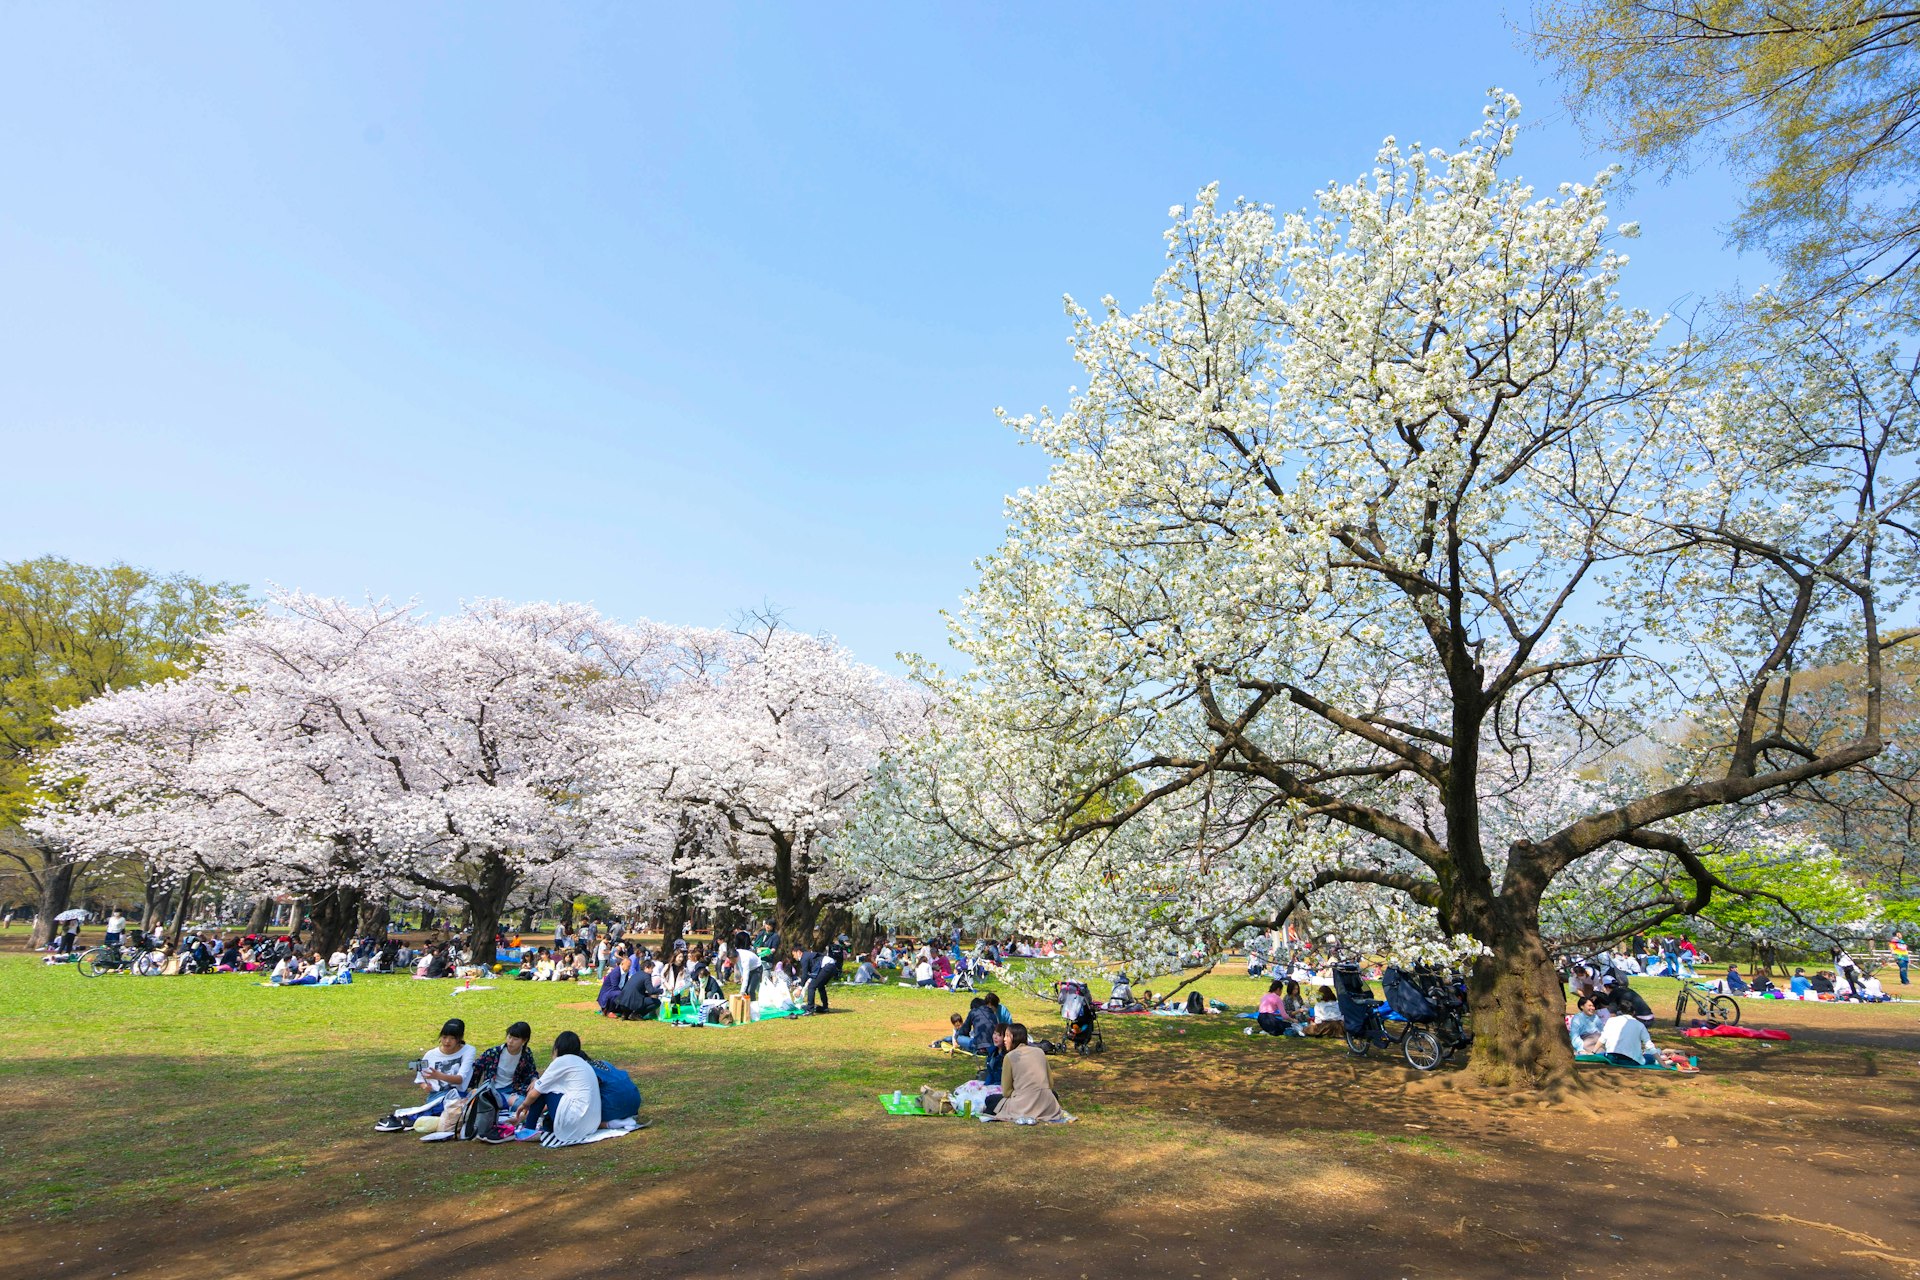 Groups of people gather under cherry trees with pink and white flowers in a park